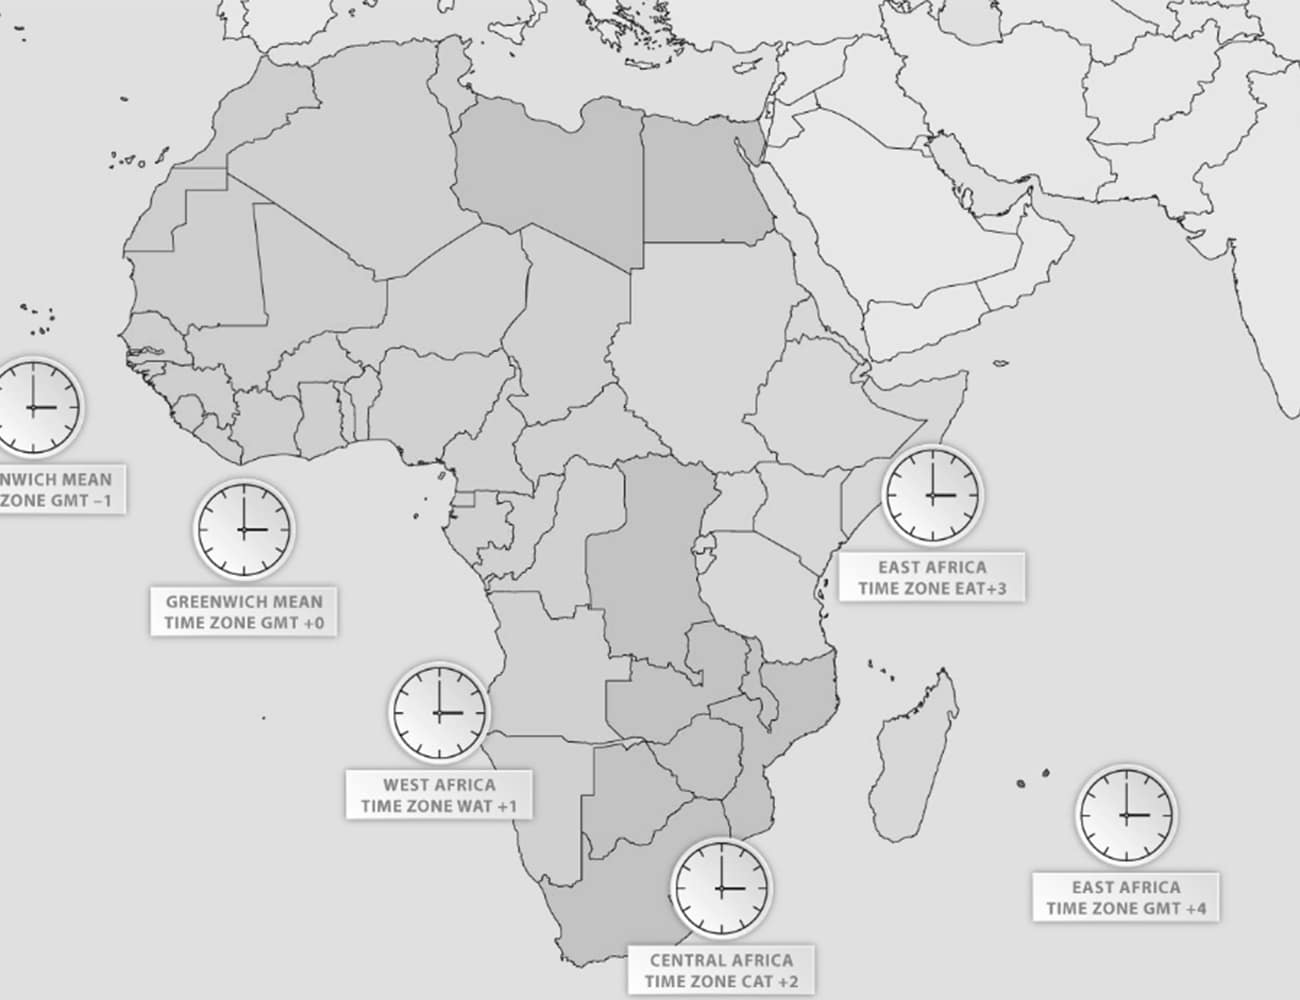 A map showing African Time Zones